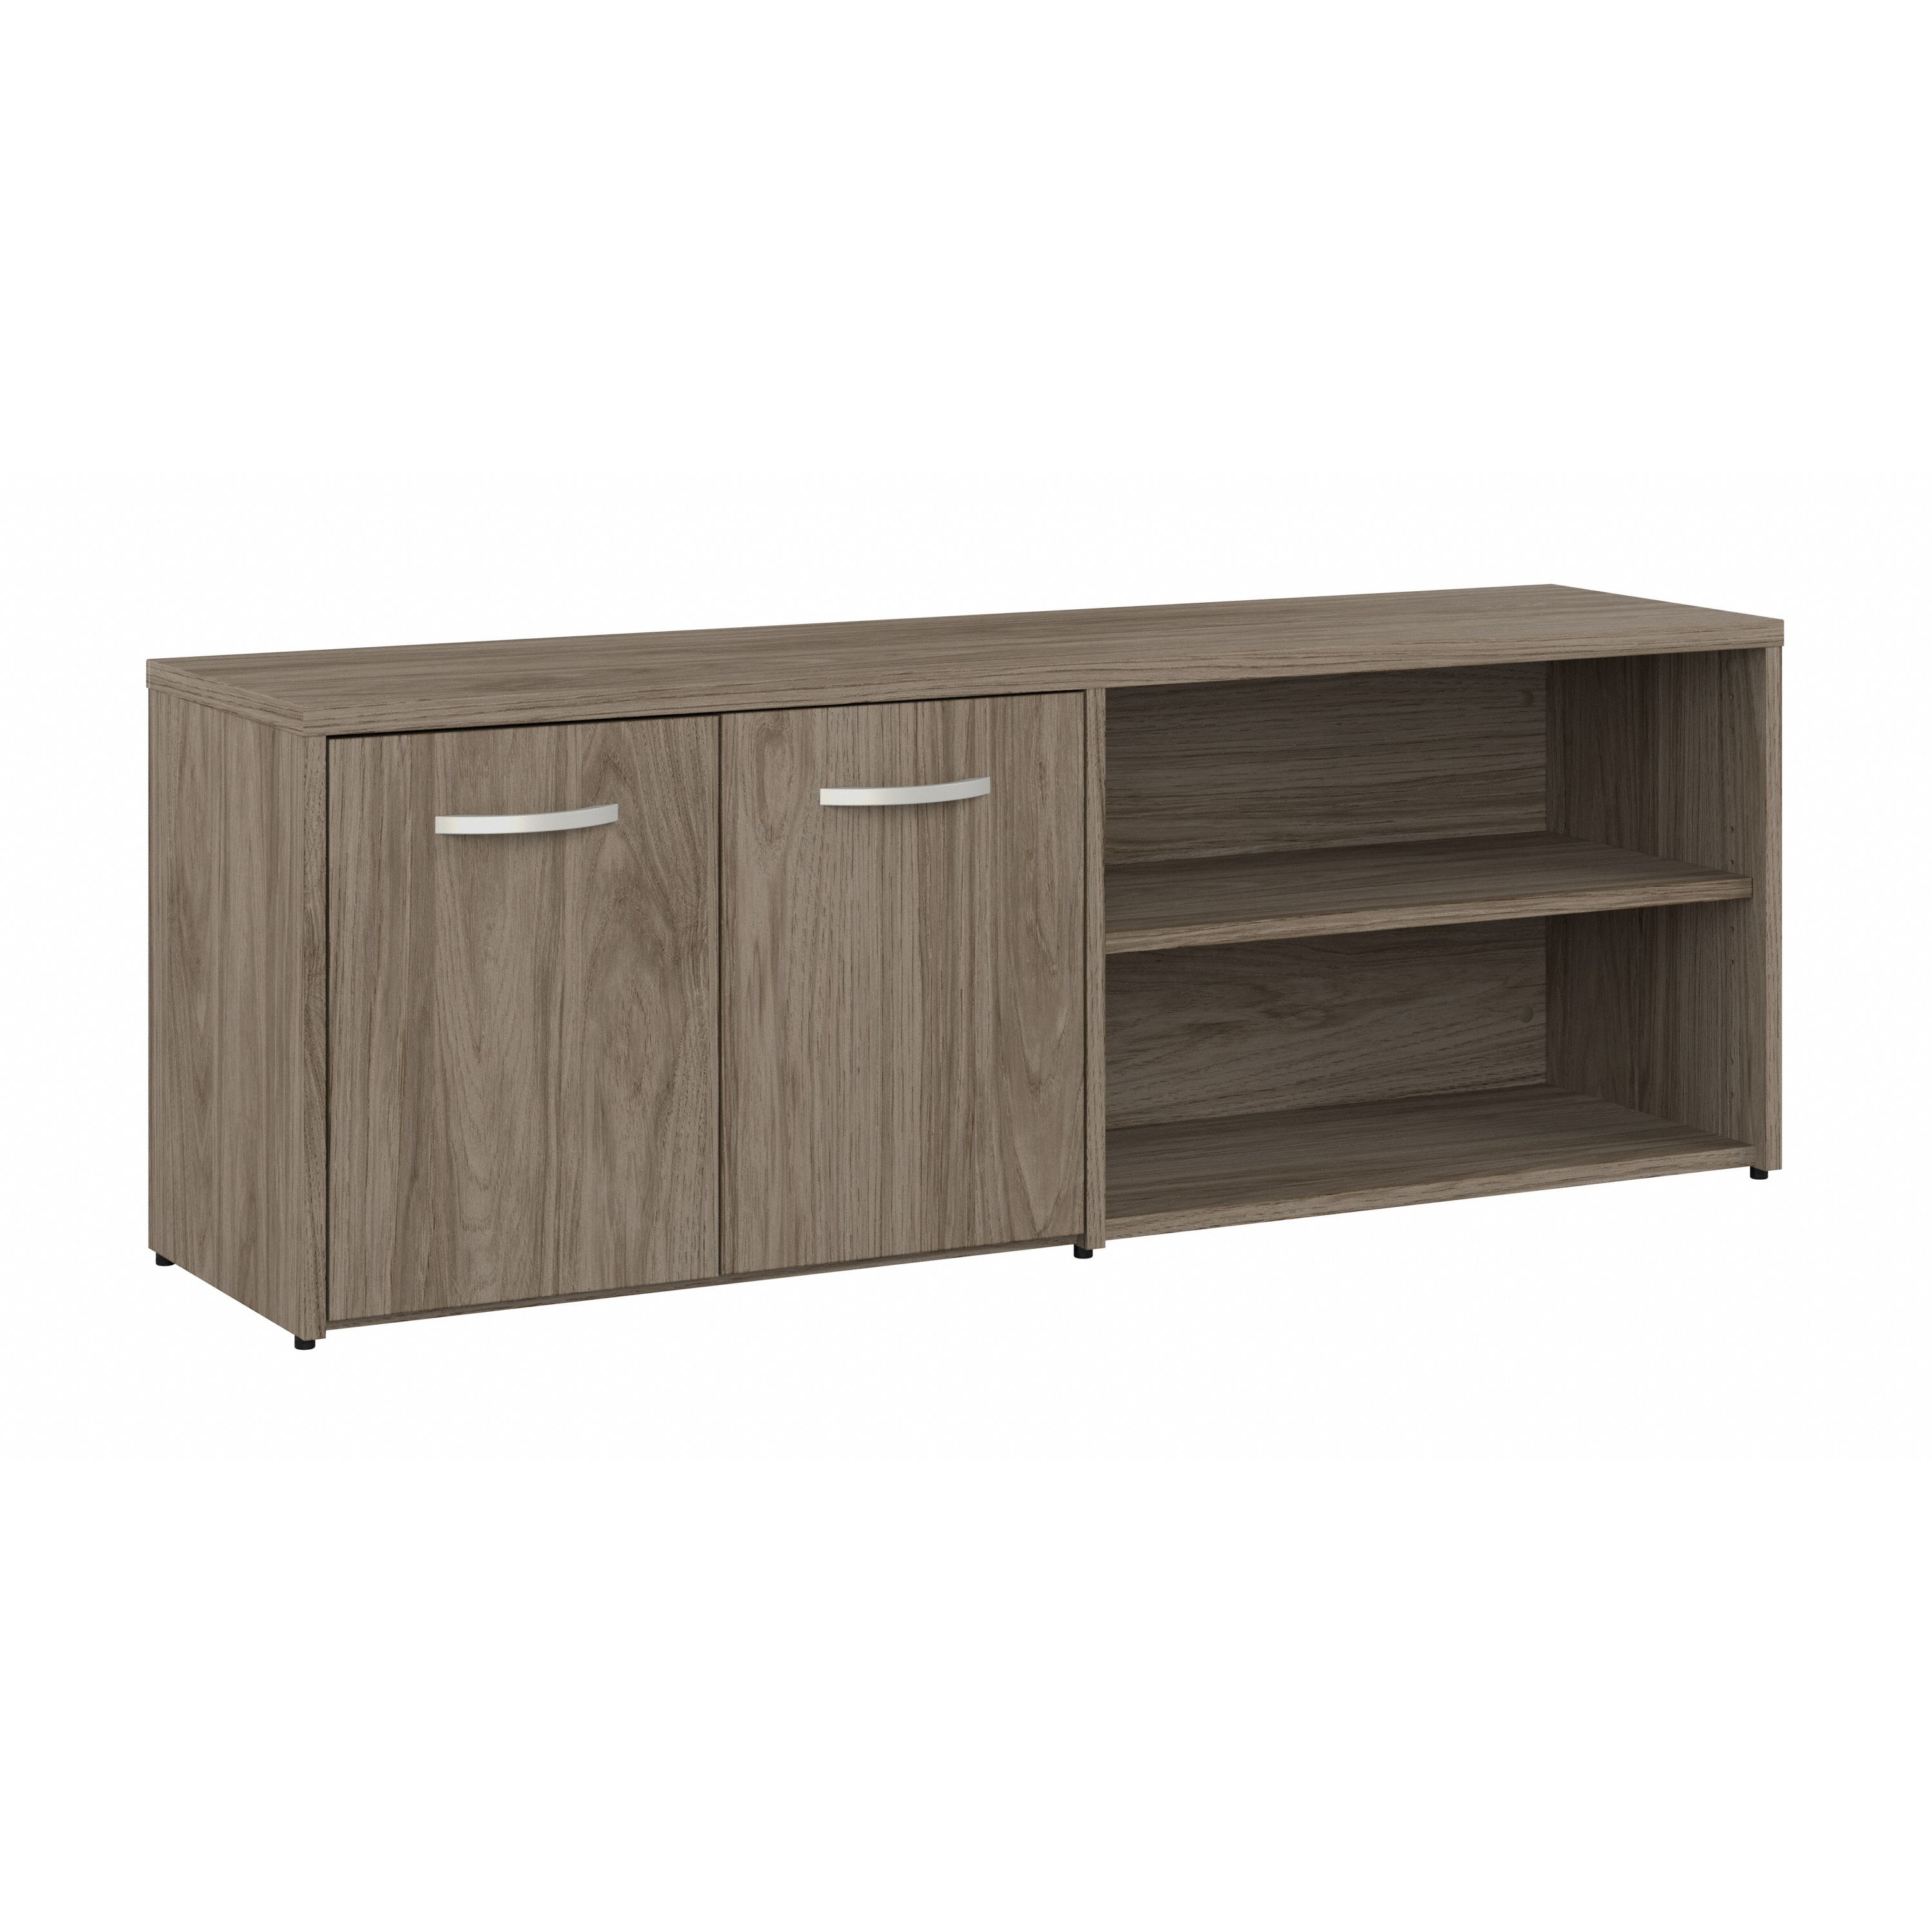 Shop Bush Business Furniture Hybrid Low Storage Cabinet with Doors and Shelves 02 HYS160MH-Z #color_modern hickory